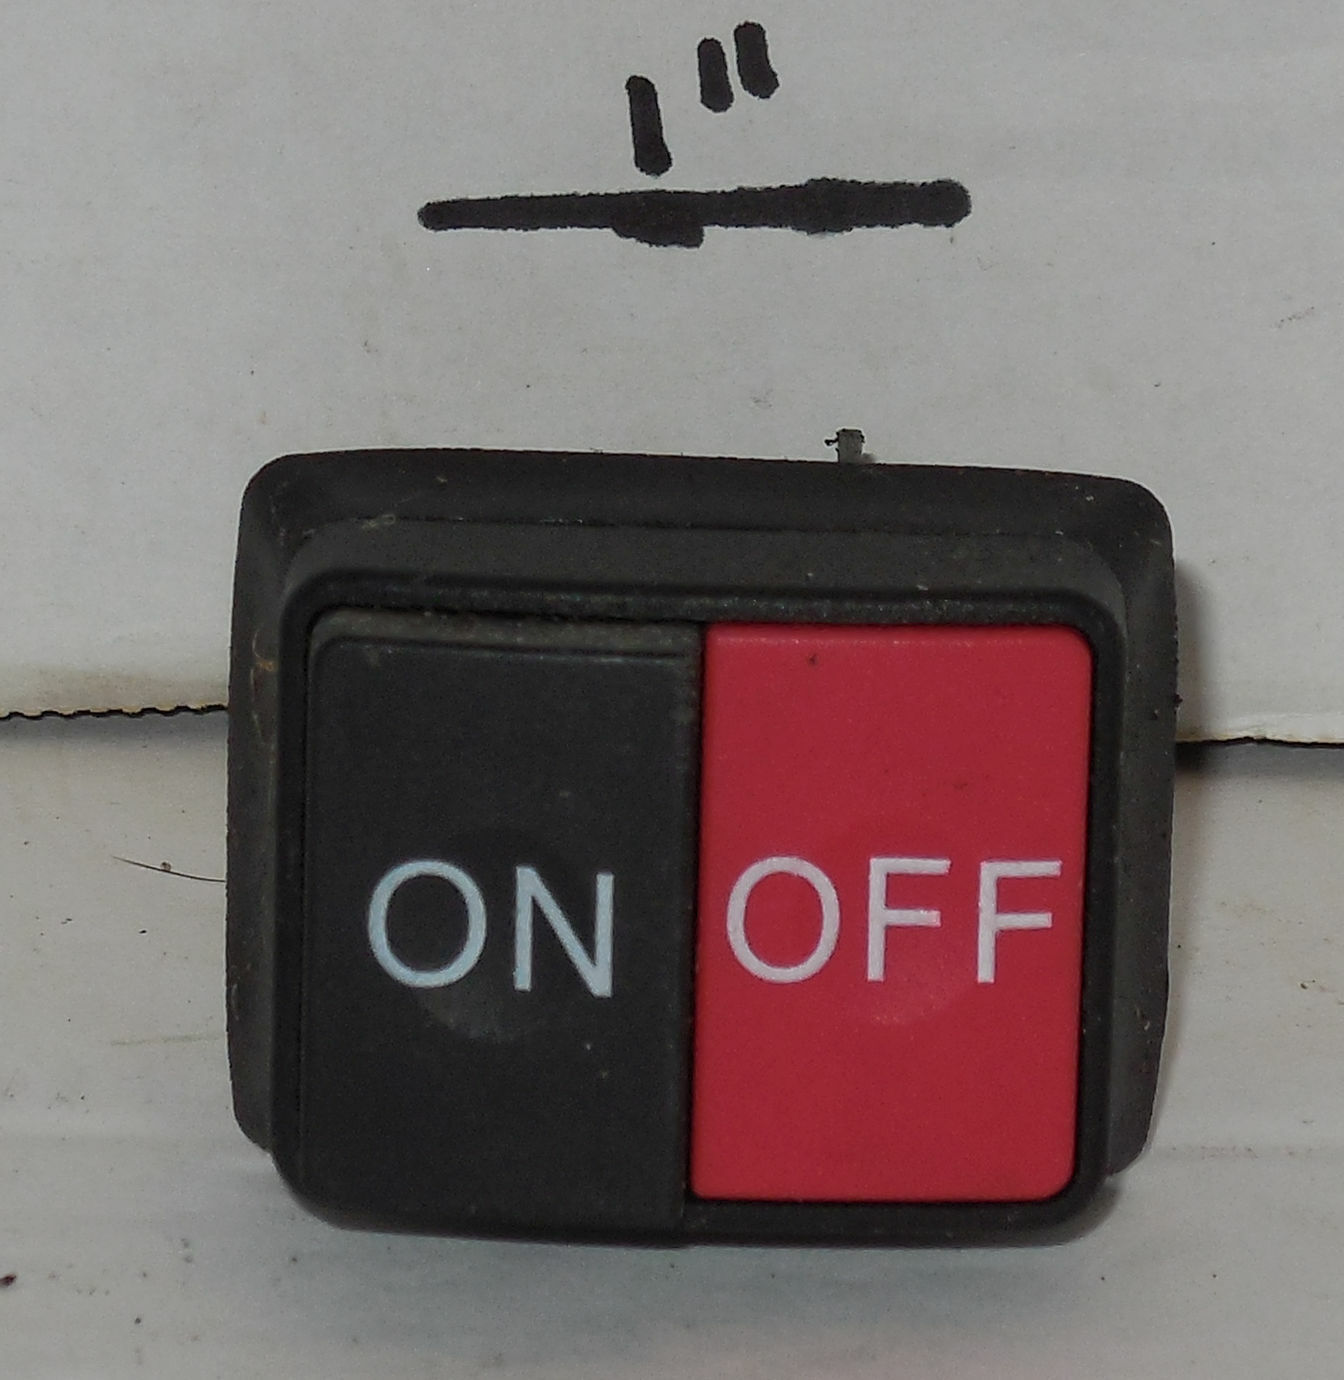 Primary image for Simpson Pressure Washer Model 13SIE-170 Replacement On Off Switch